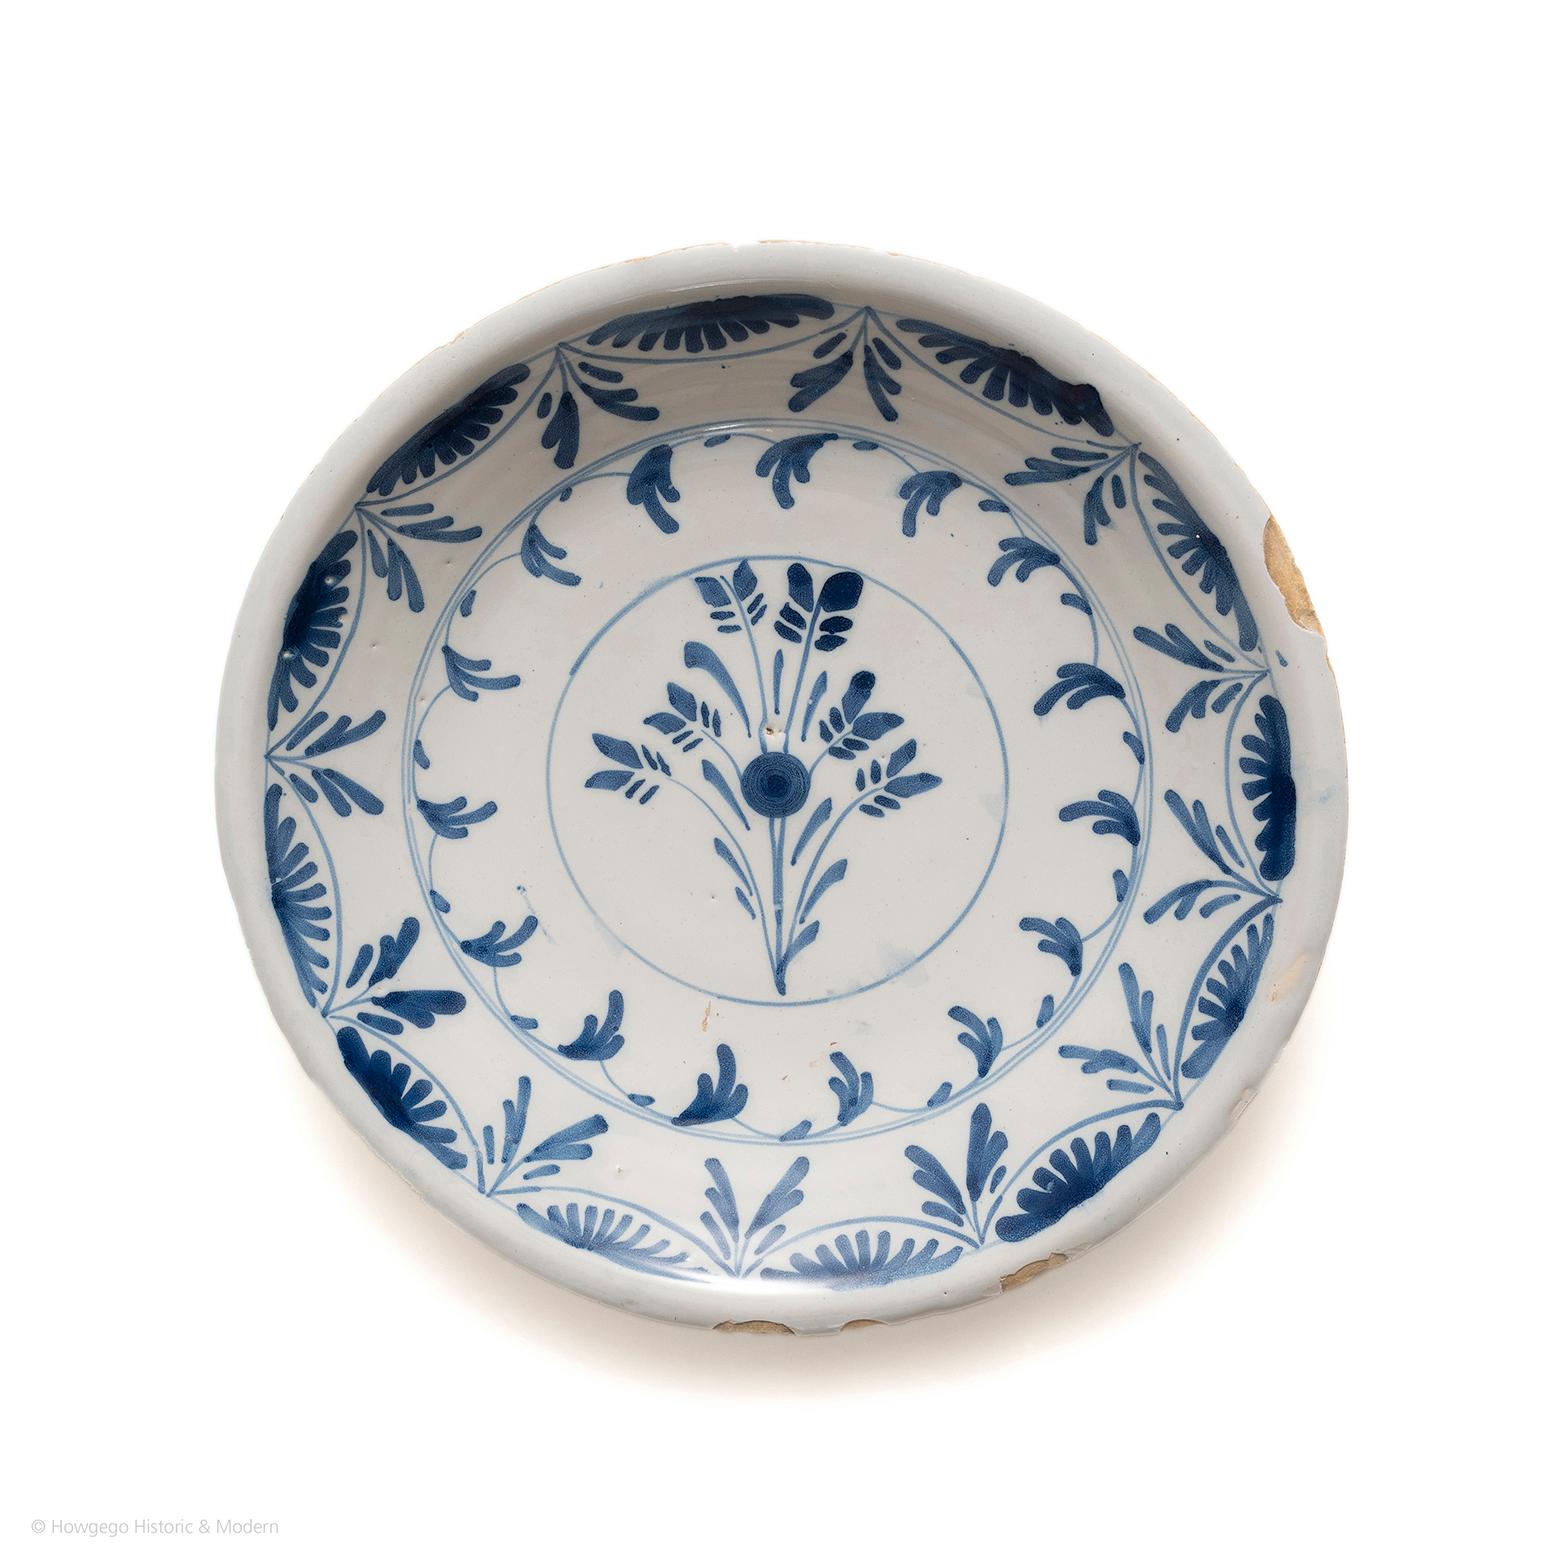 Beautiful, early stylised decoration evoking the striking simplicity of early Chinoiserie painting

Painted with a central floral spray within a circle centre, surrounded by a trailing leaf border within a stylised leaf border. Painted in blue on